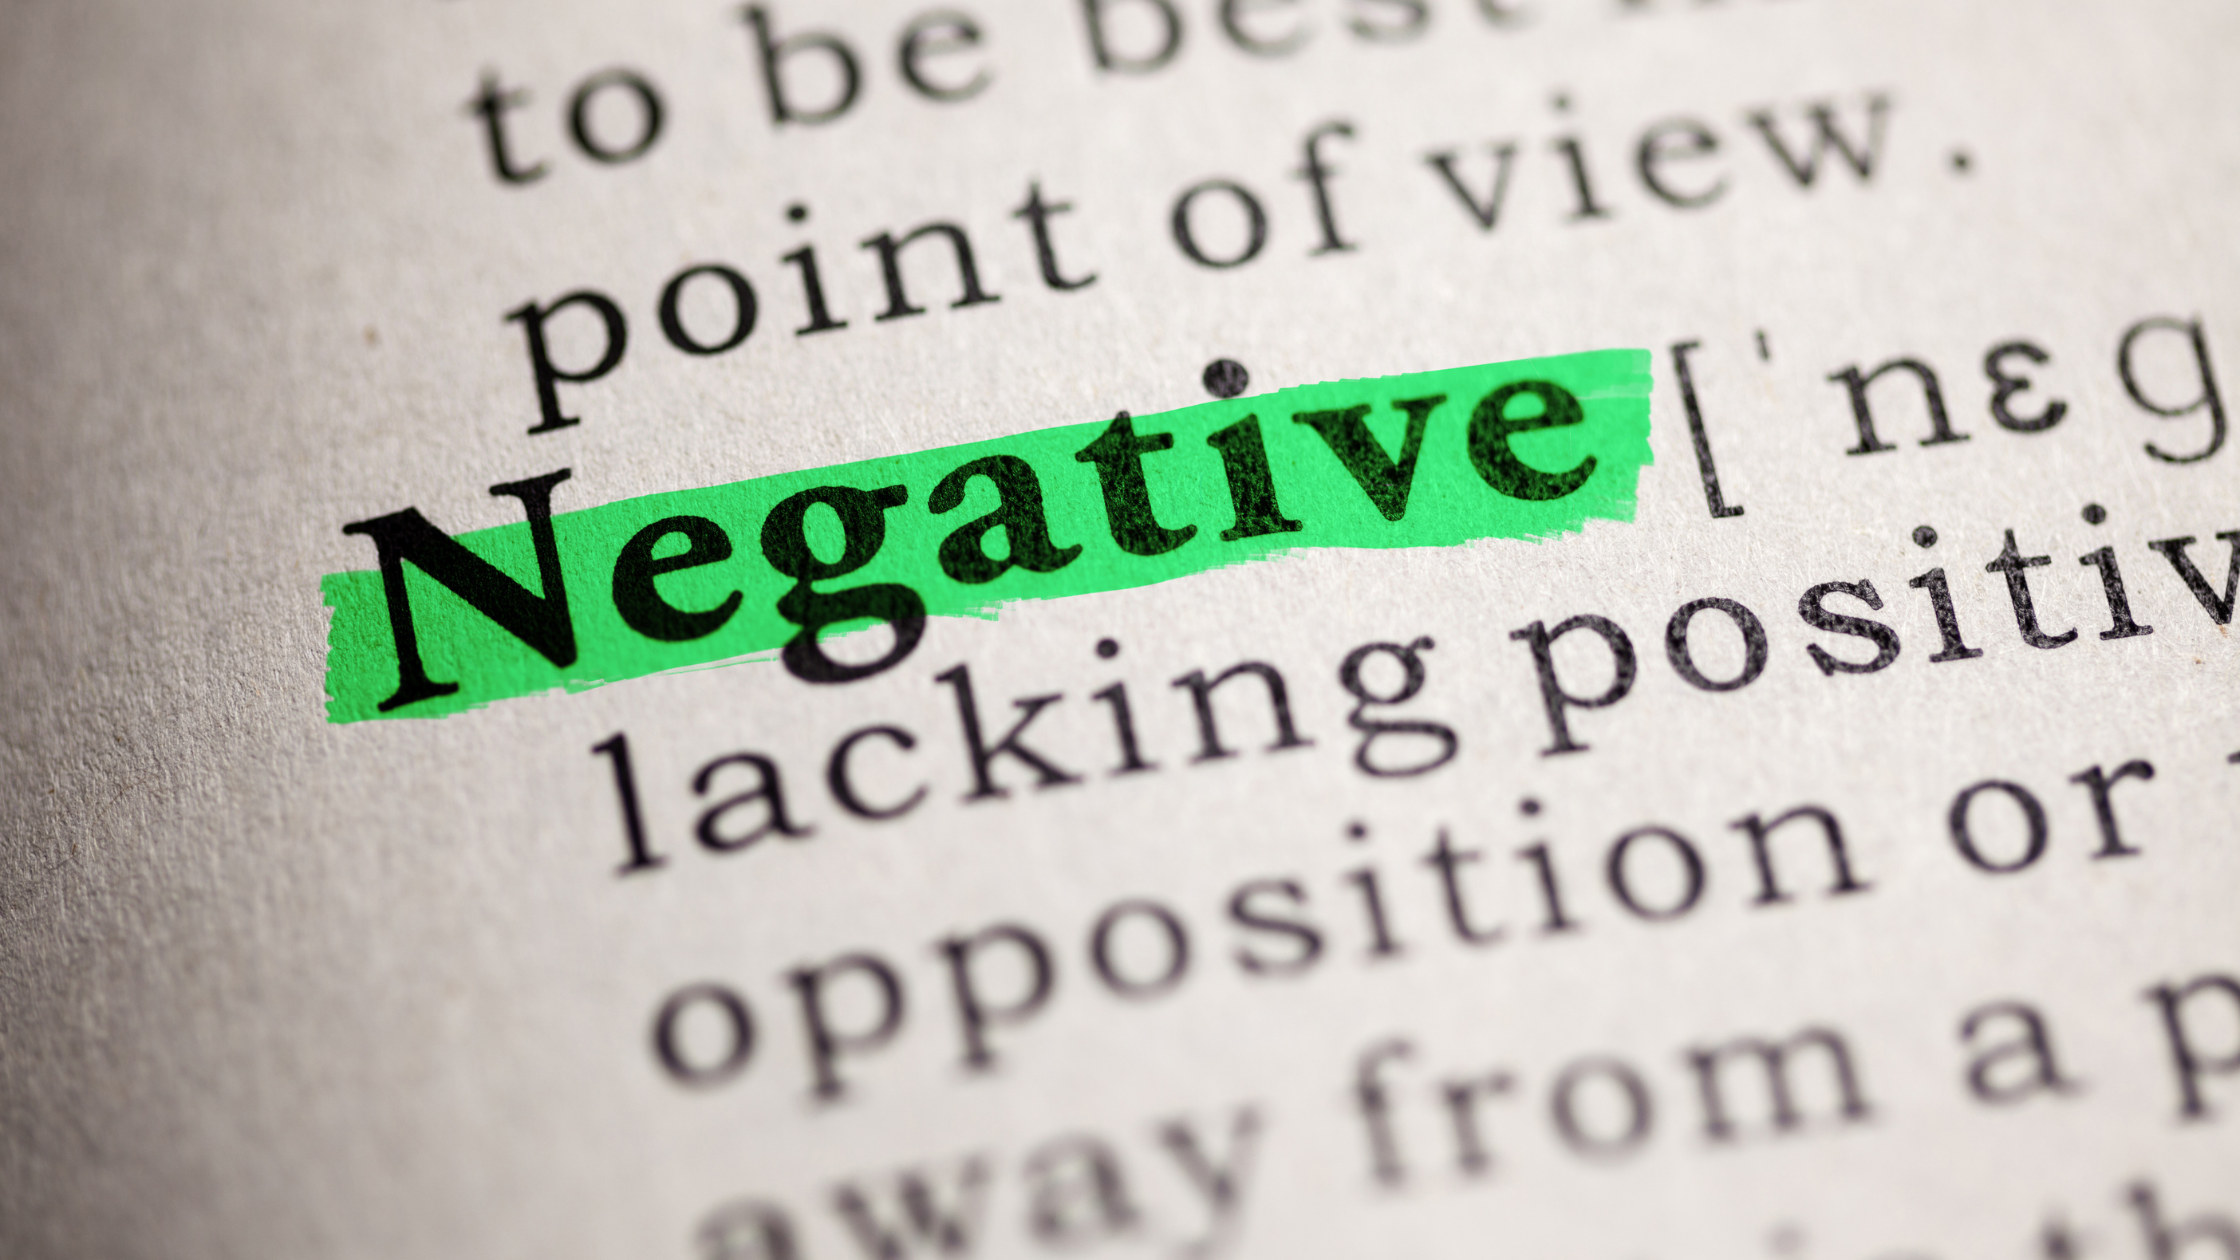 Negative keywords are another great technique to optimize our PPC campaigns